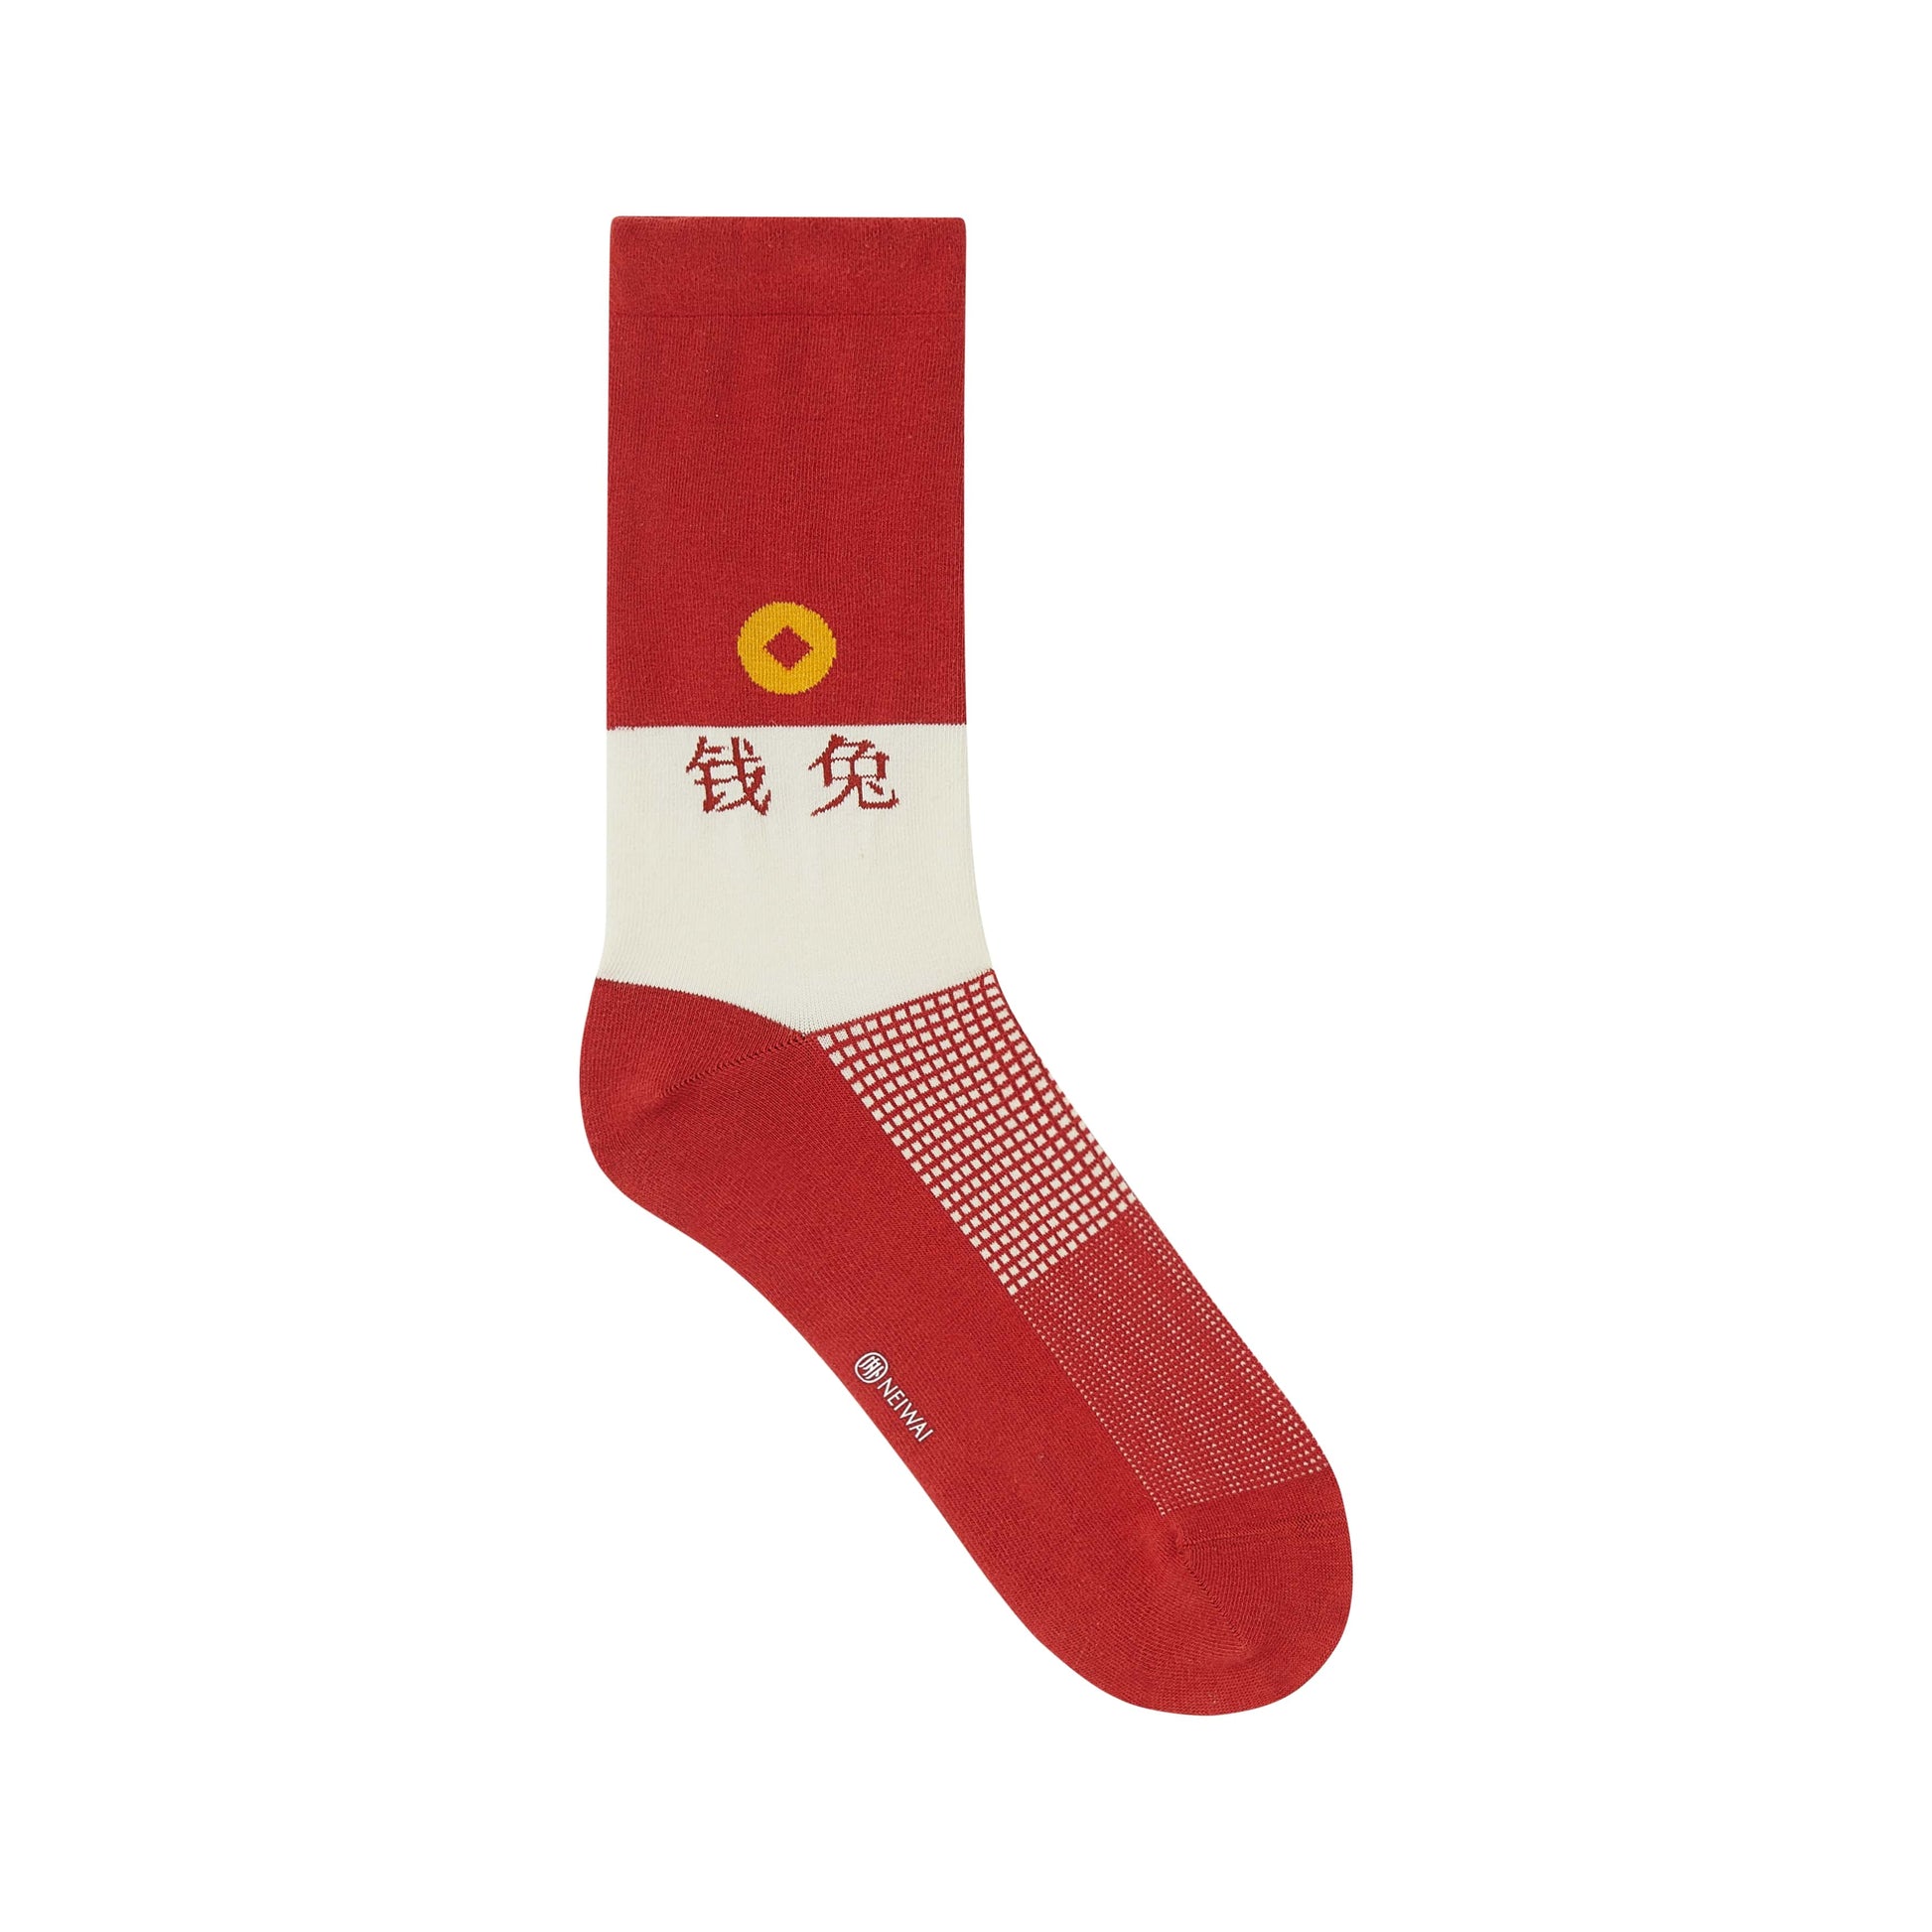 a red sock